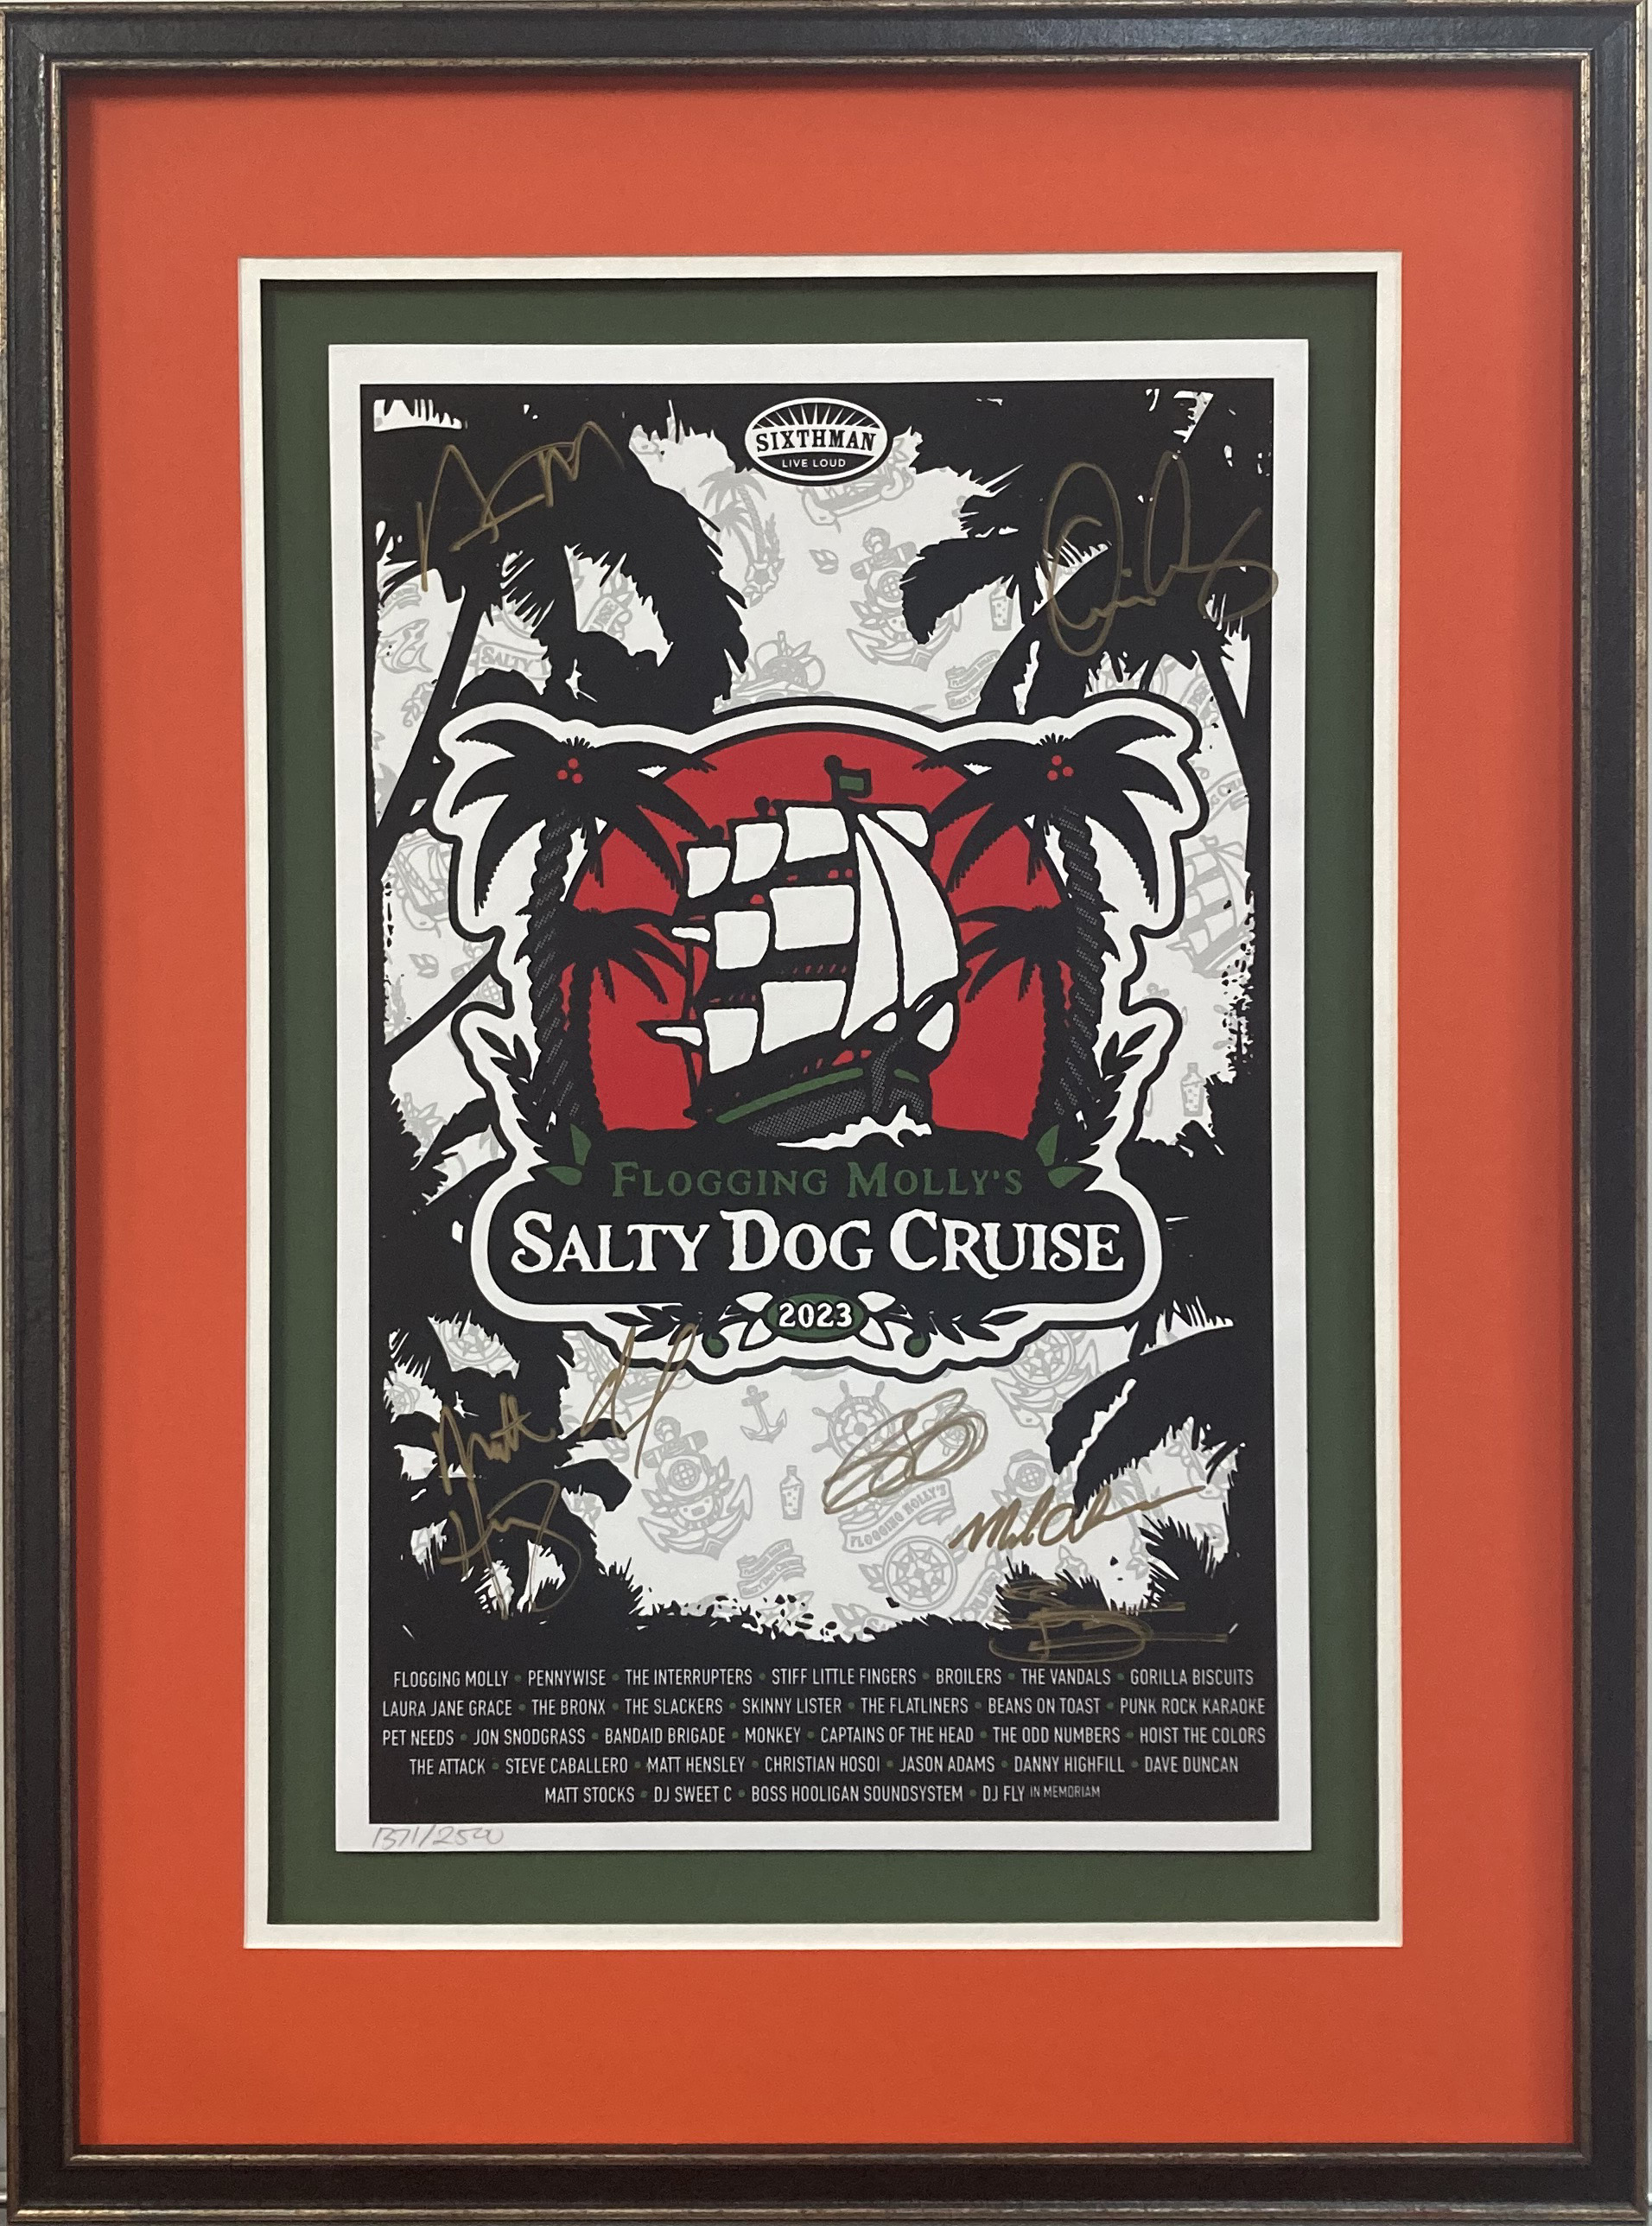 black, white and red Salty Dog Cruise poster in a black frame with red, white and gray matting